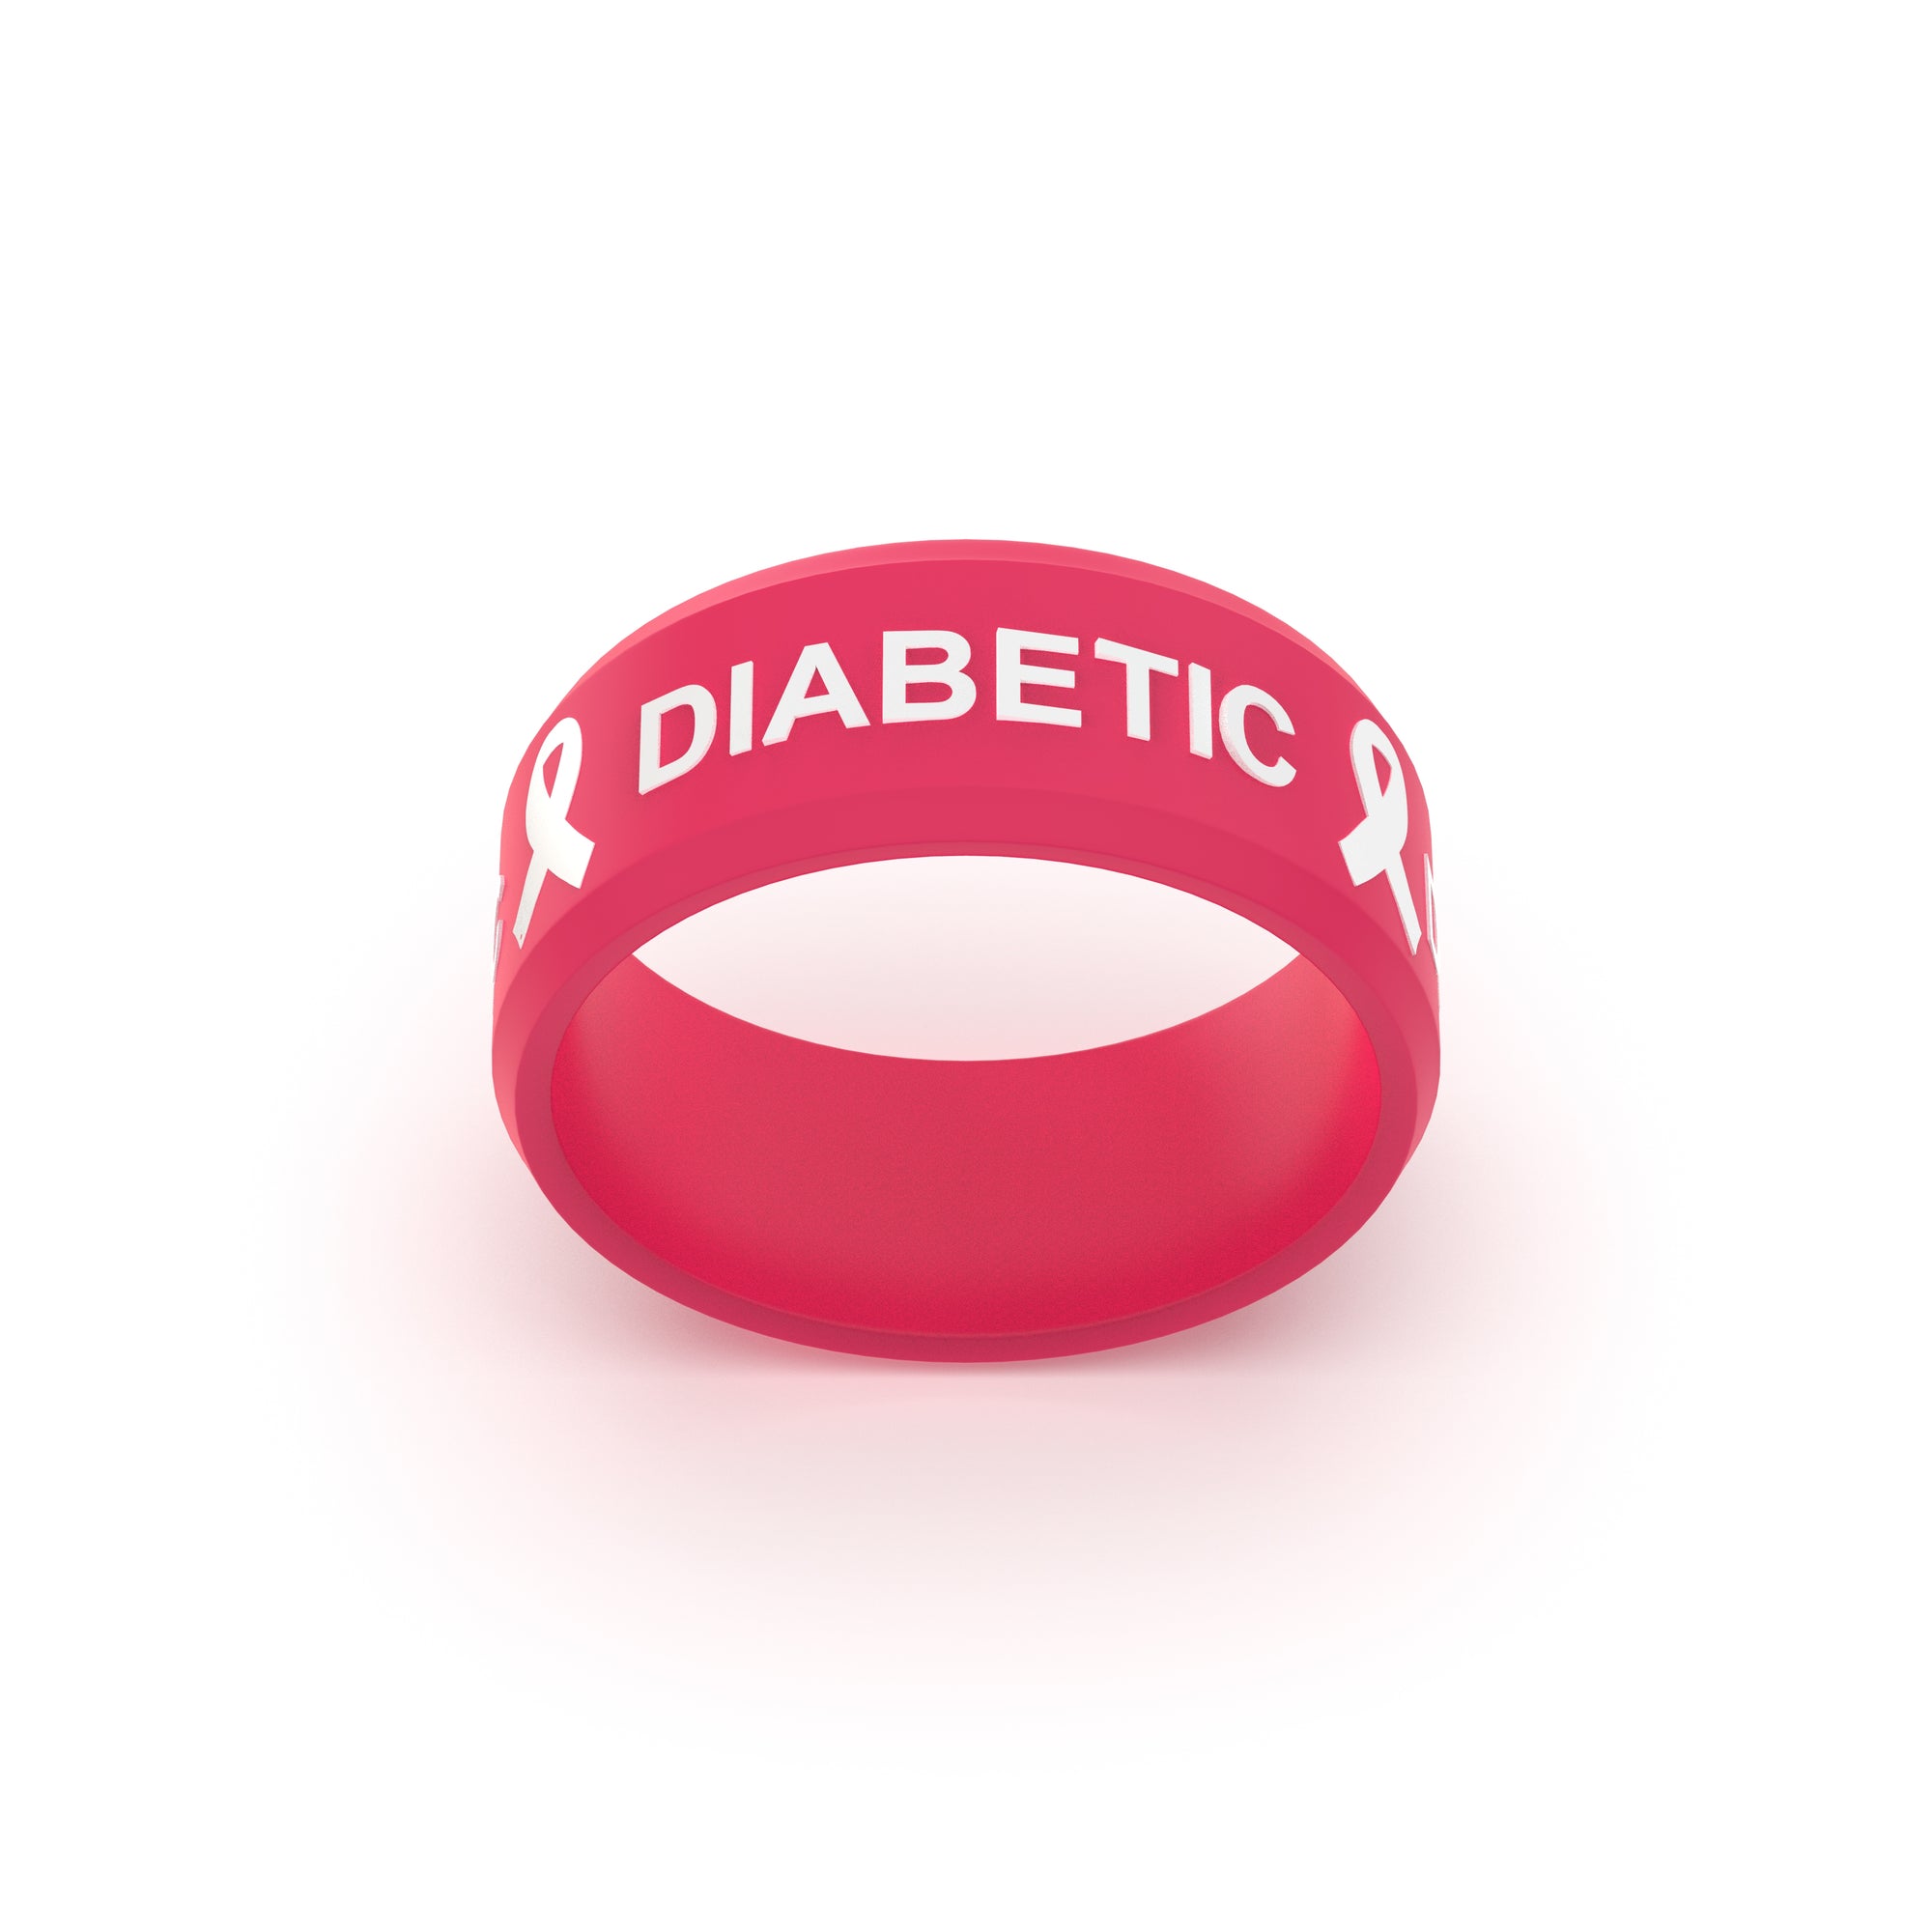 FREE Magenta Silicone Diabetic Ring - Just Pay Shipping